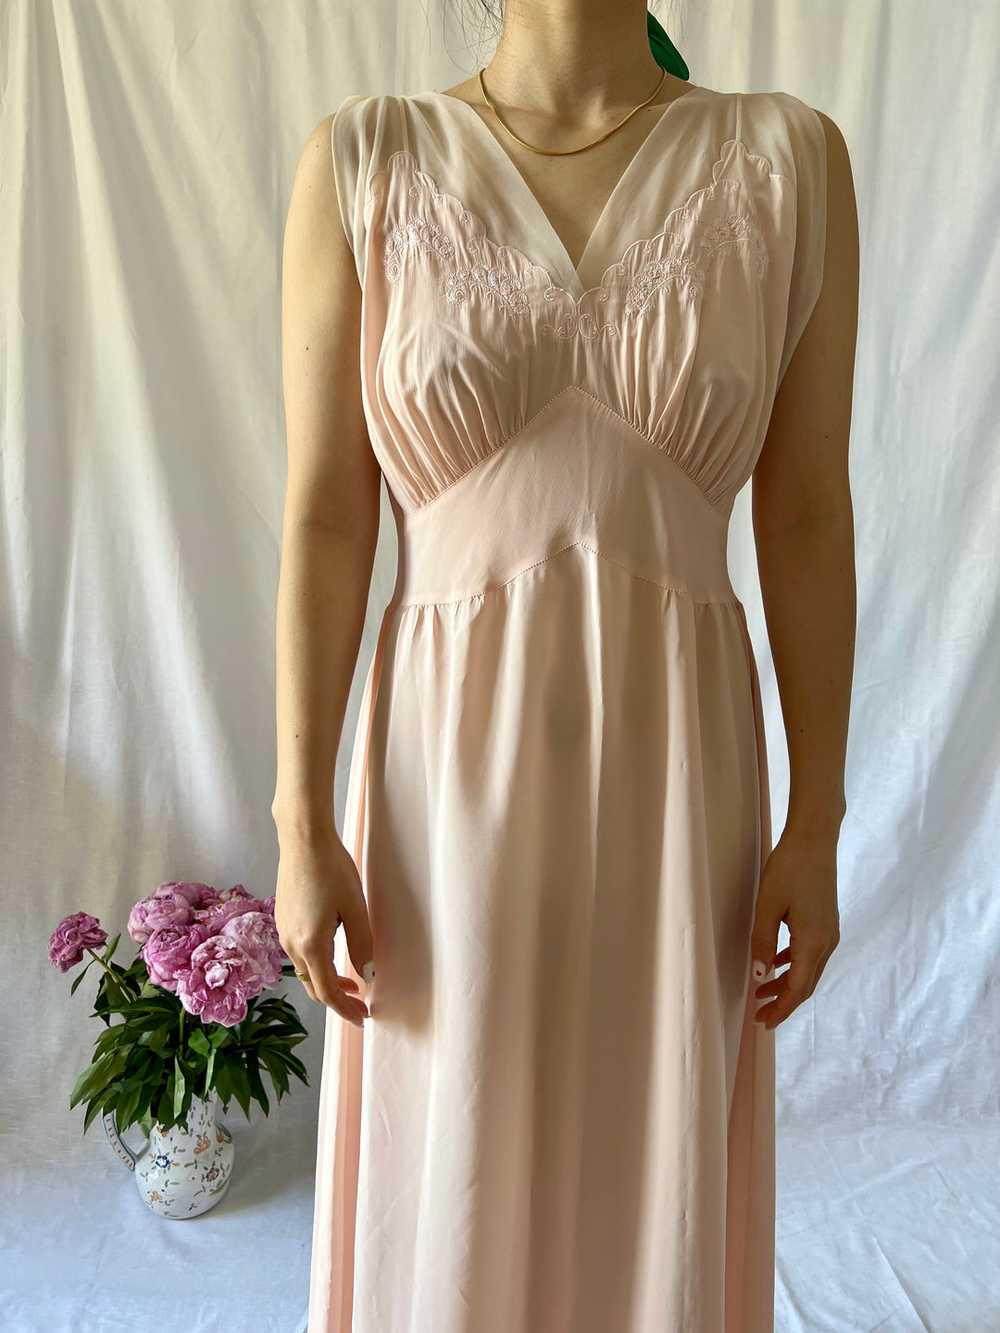 Vintage 1930s silk and tulle blush pink dress - image 5